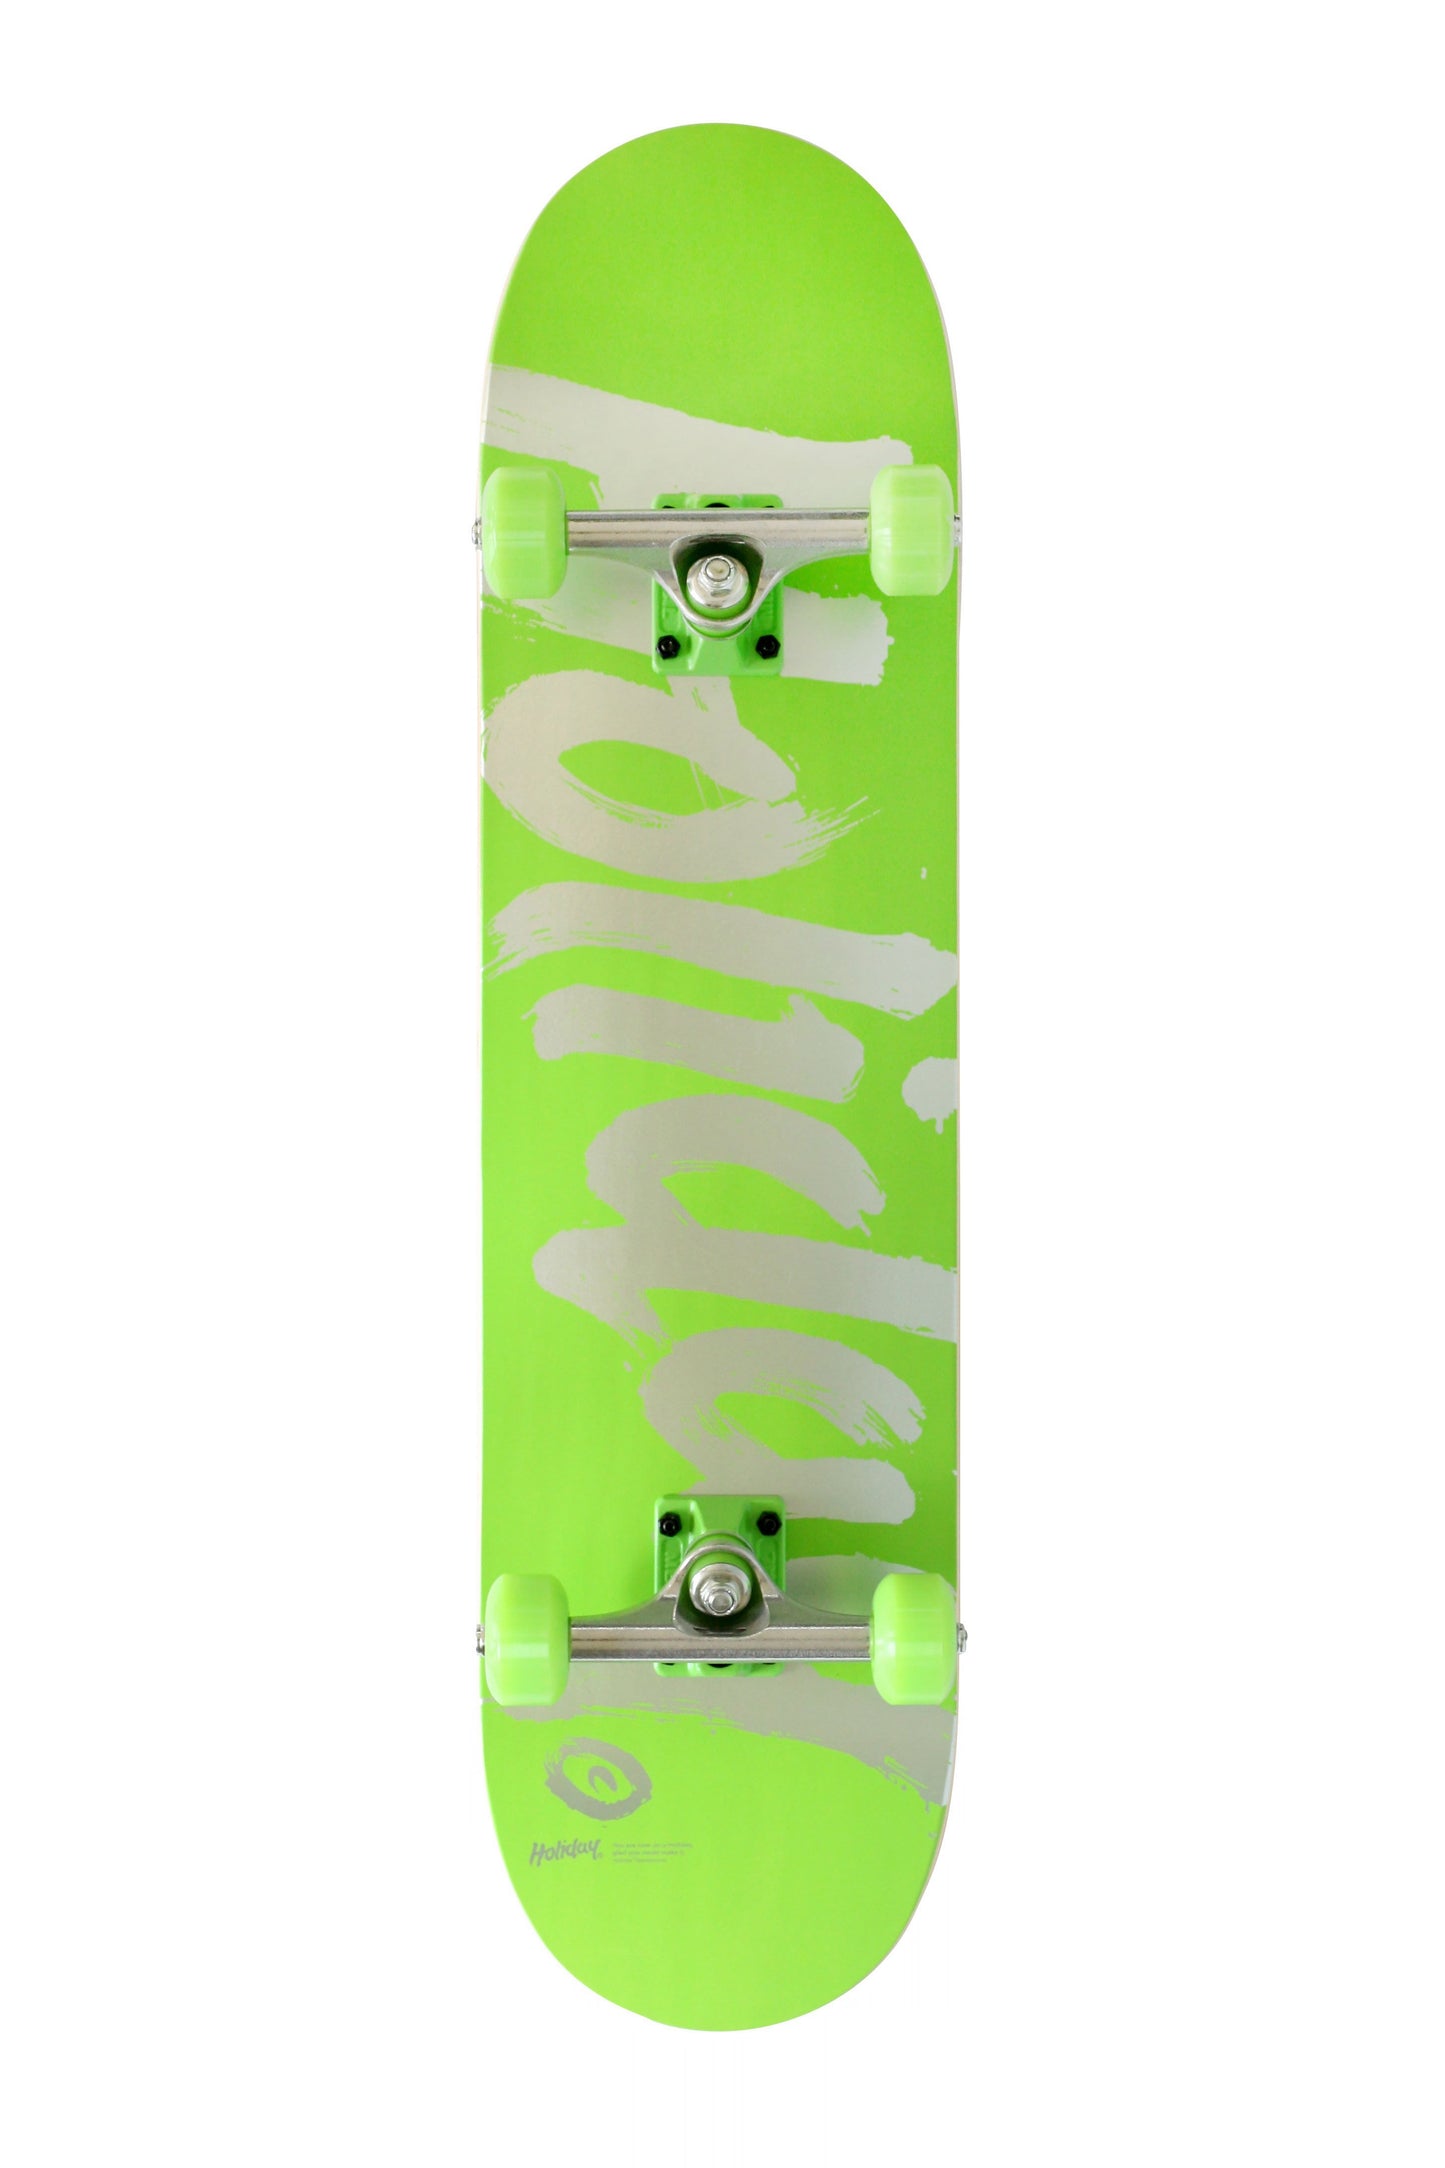 Holiday Skateboards - Foil Series "Green"